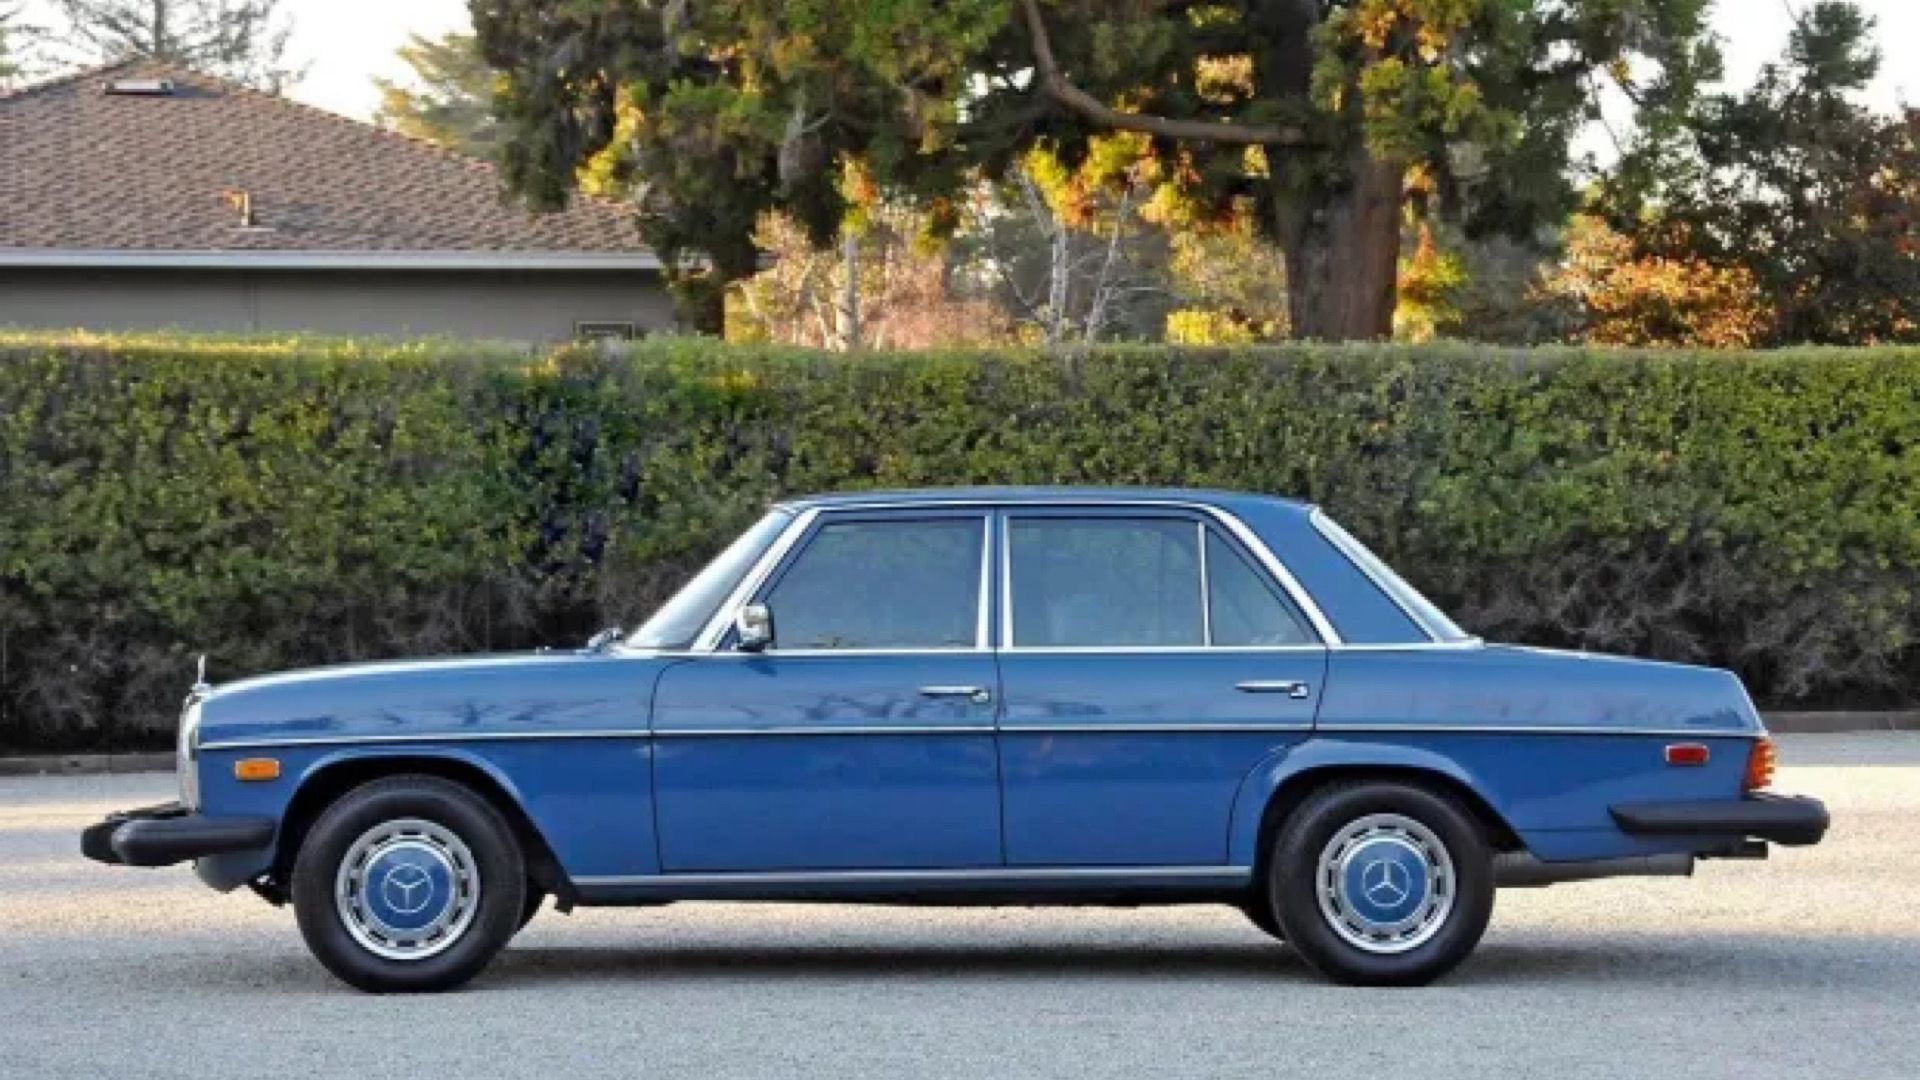 1976 Mercedes-Benz 240D in blue Posing in front of hedge